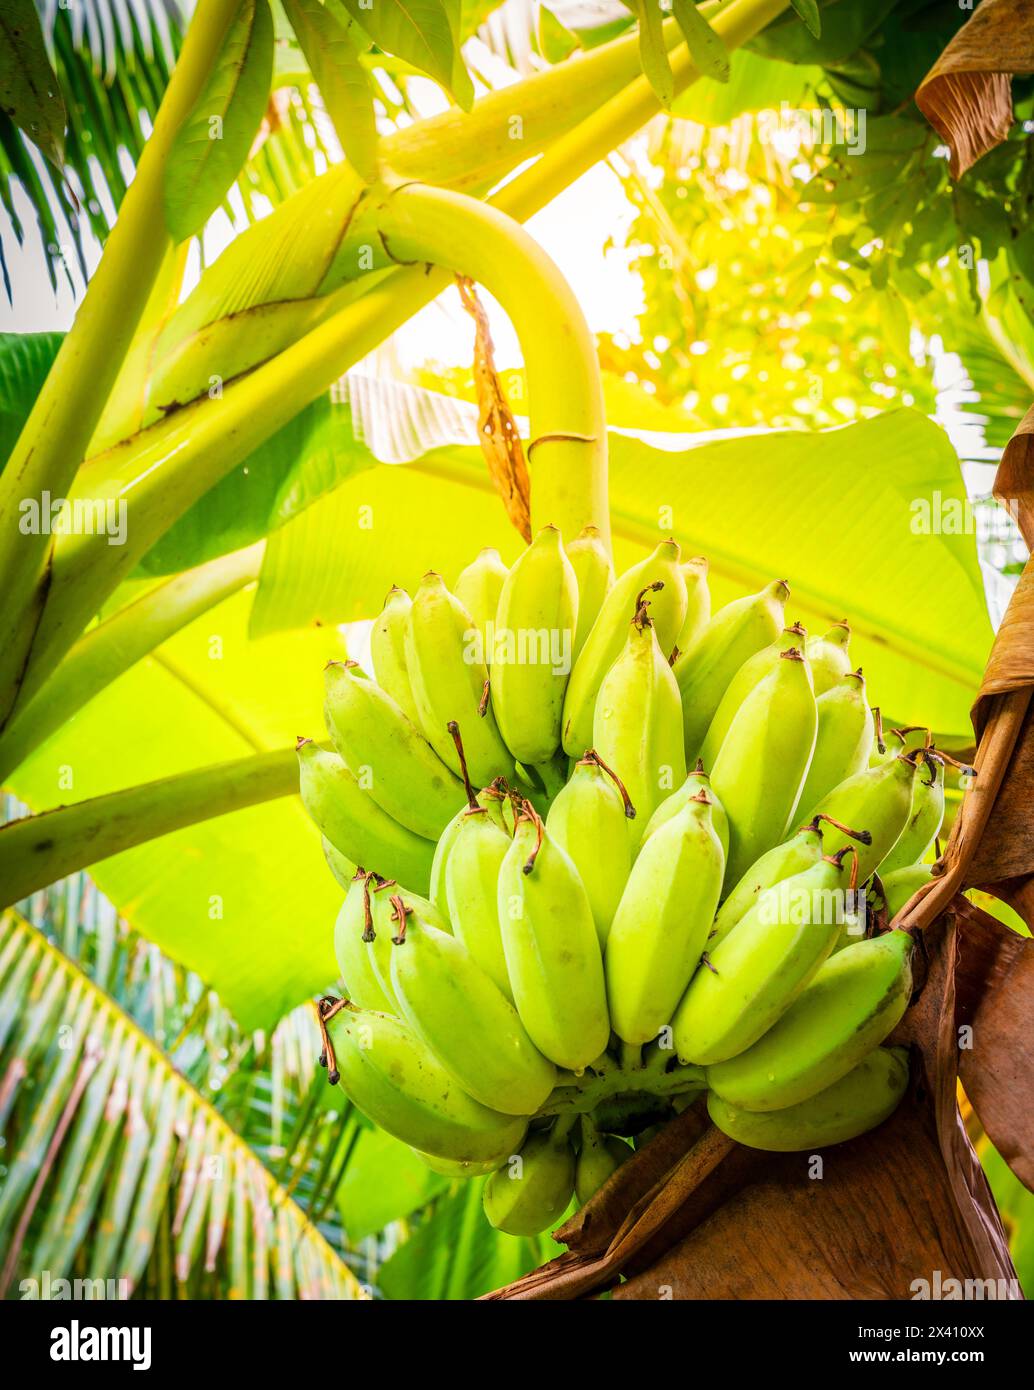 Close-up image of a banana plant branch with fruit Stock Photo